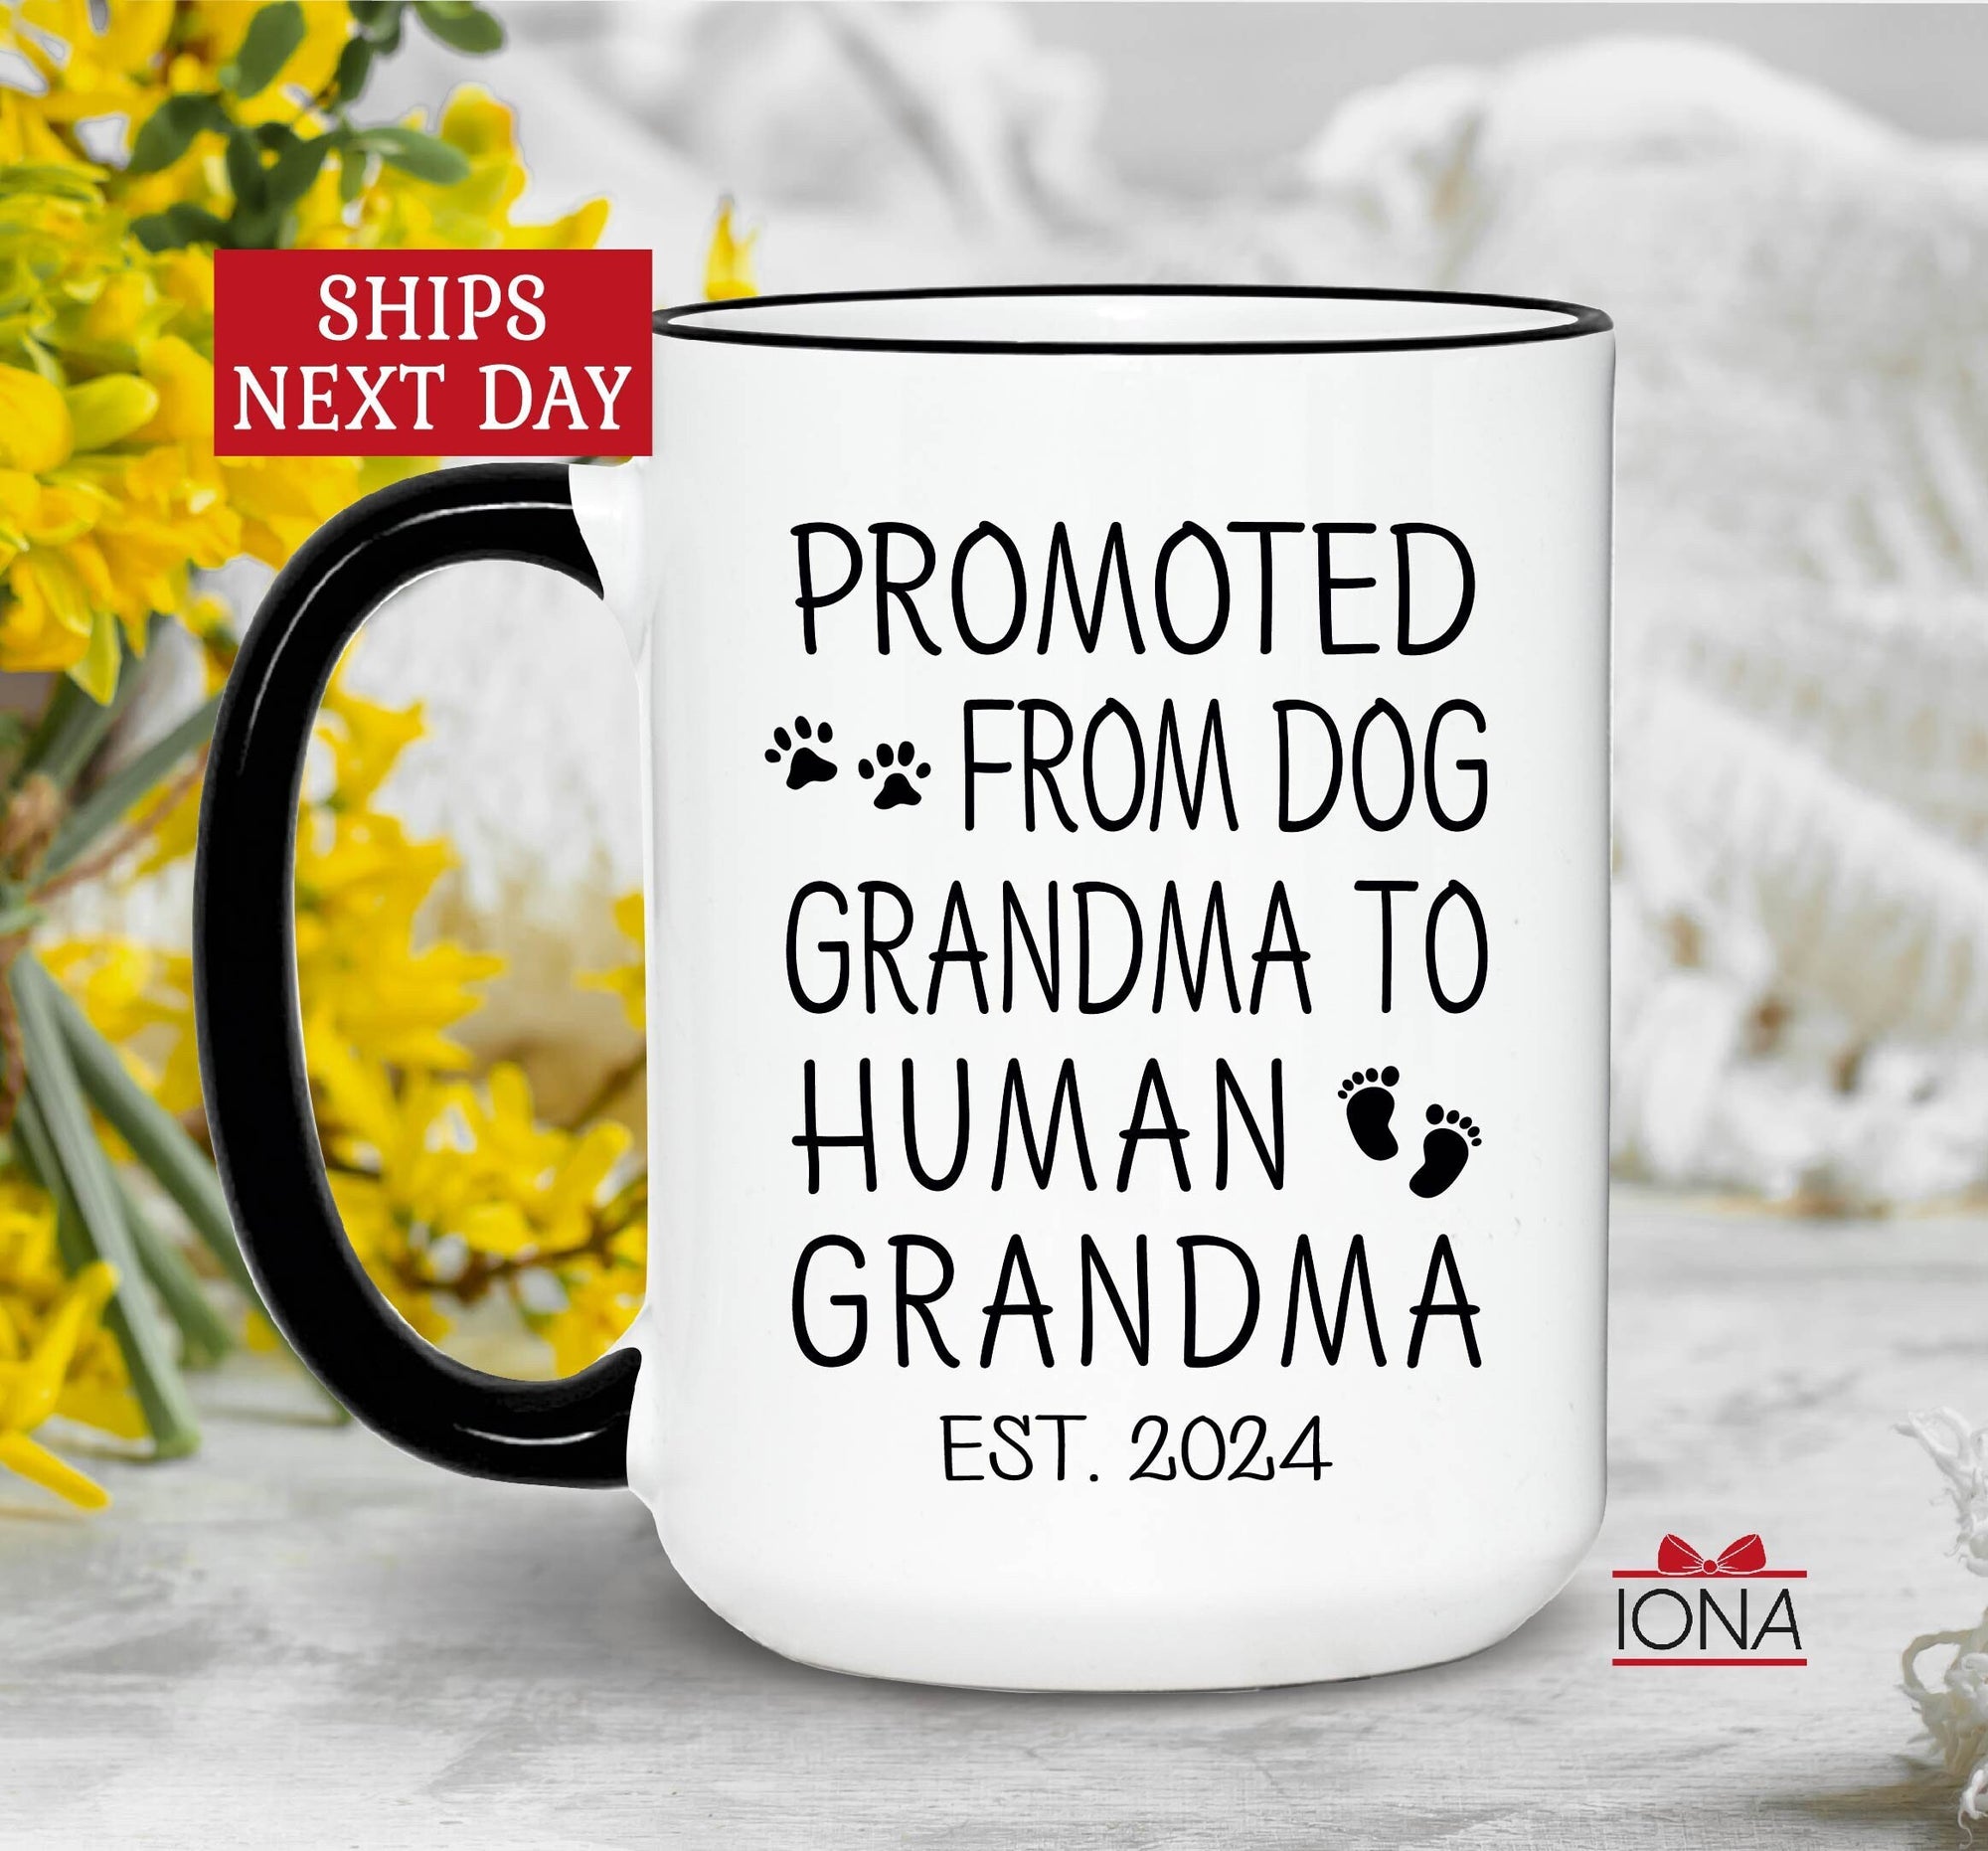 New Grandma Promoted to Grandma from Dog Grandmother, Pregnancy Announcement, New Grandma Gift, Baby Announcement Birth of First Grandchild